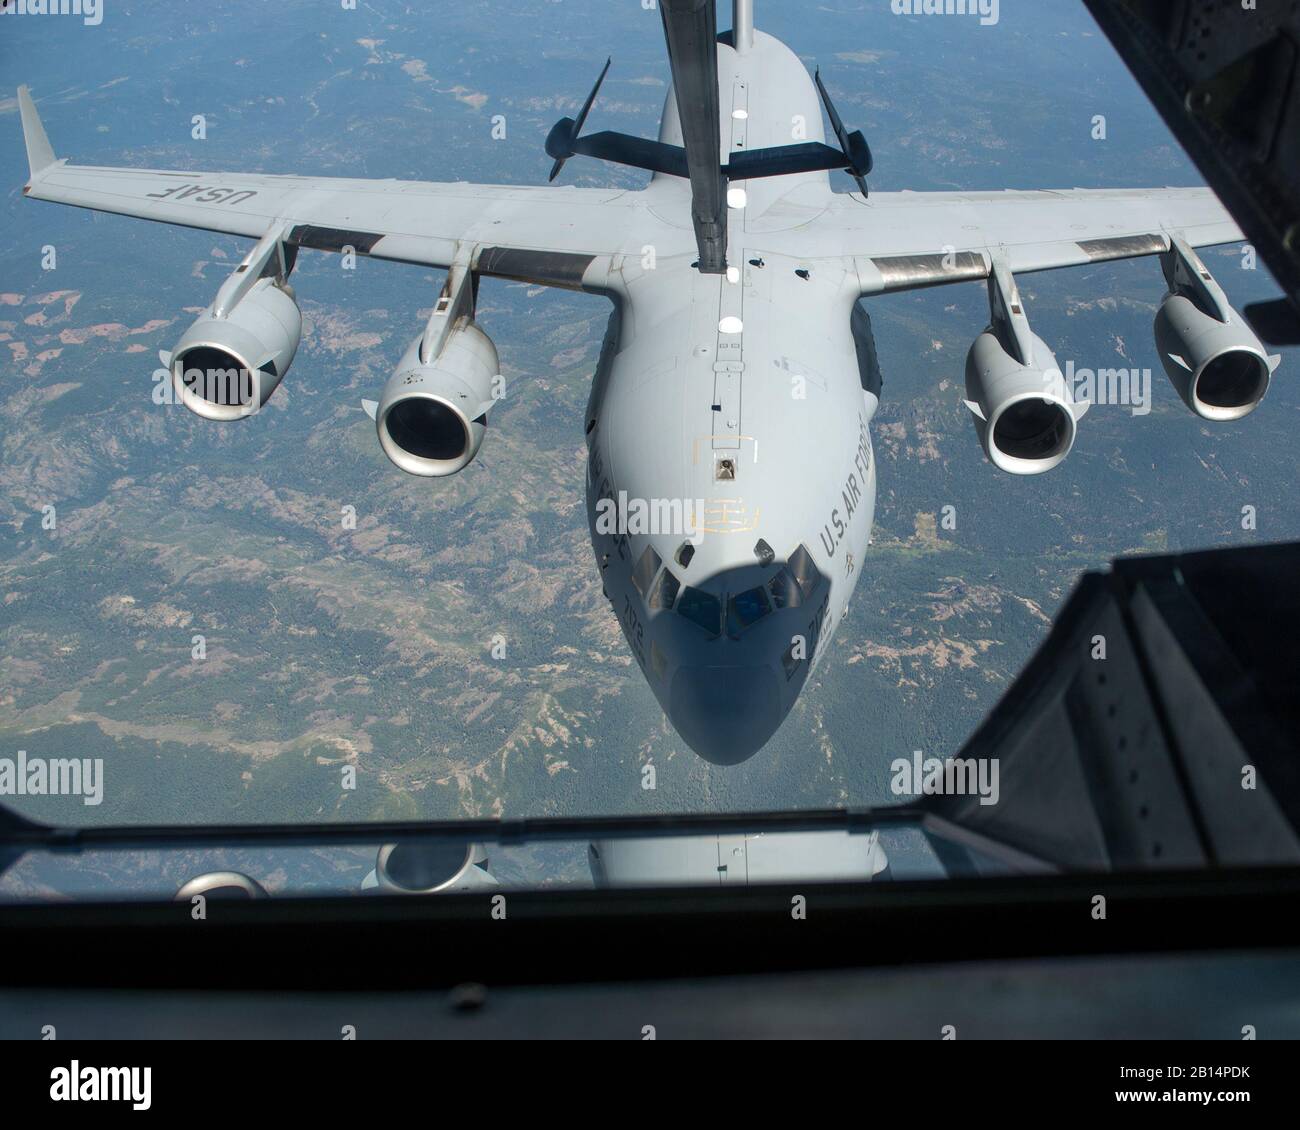 A U.S. Air Force C-17 Globemaster III from the 301st Airlift Squadron, 349th Air Mobility Wing, Travis Air Force Base, Calif., is refueled by a KC-10 Extender, July 20, 2017. The C-17 Globemaster III was conducting a local training mission in Northern Calif. (U.S. Air Force photo Louis Briscese) Stock Photo